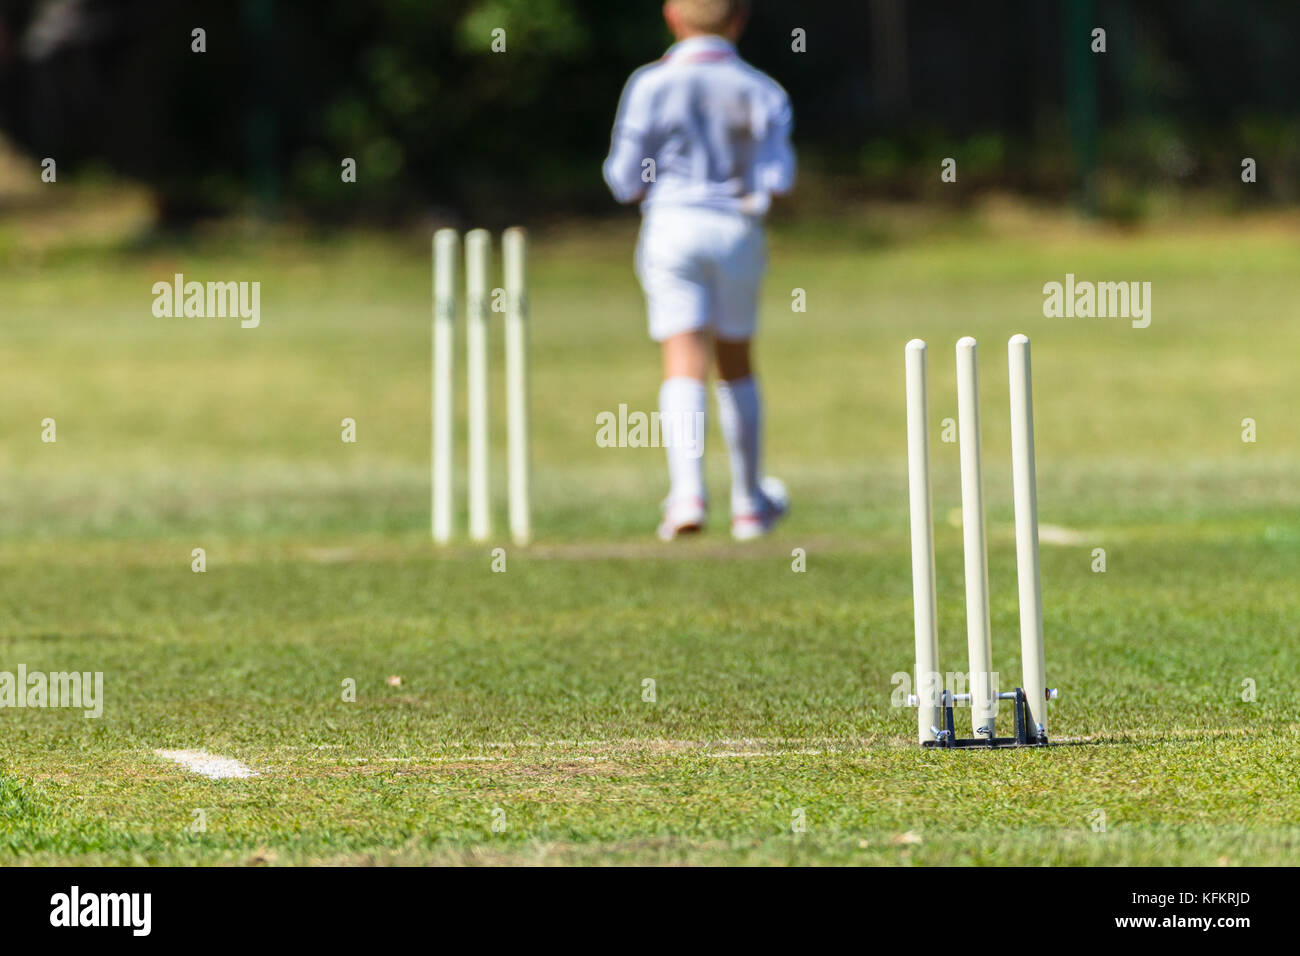 Cricket wickets grass pitch junior player bowler unidentified action abstract. Stock Photo